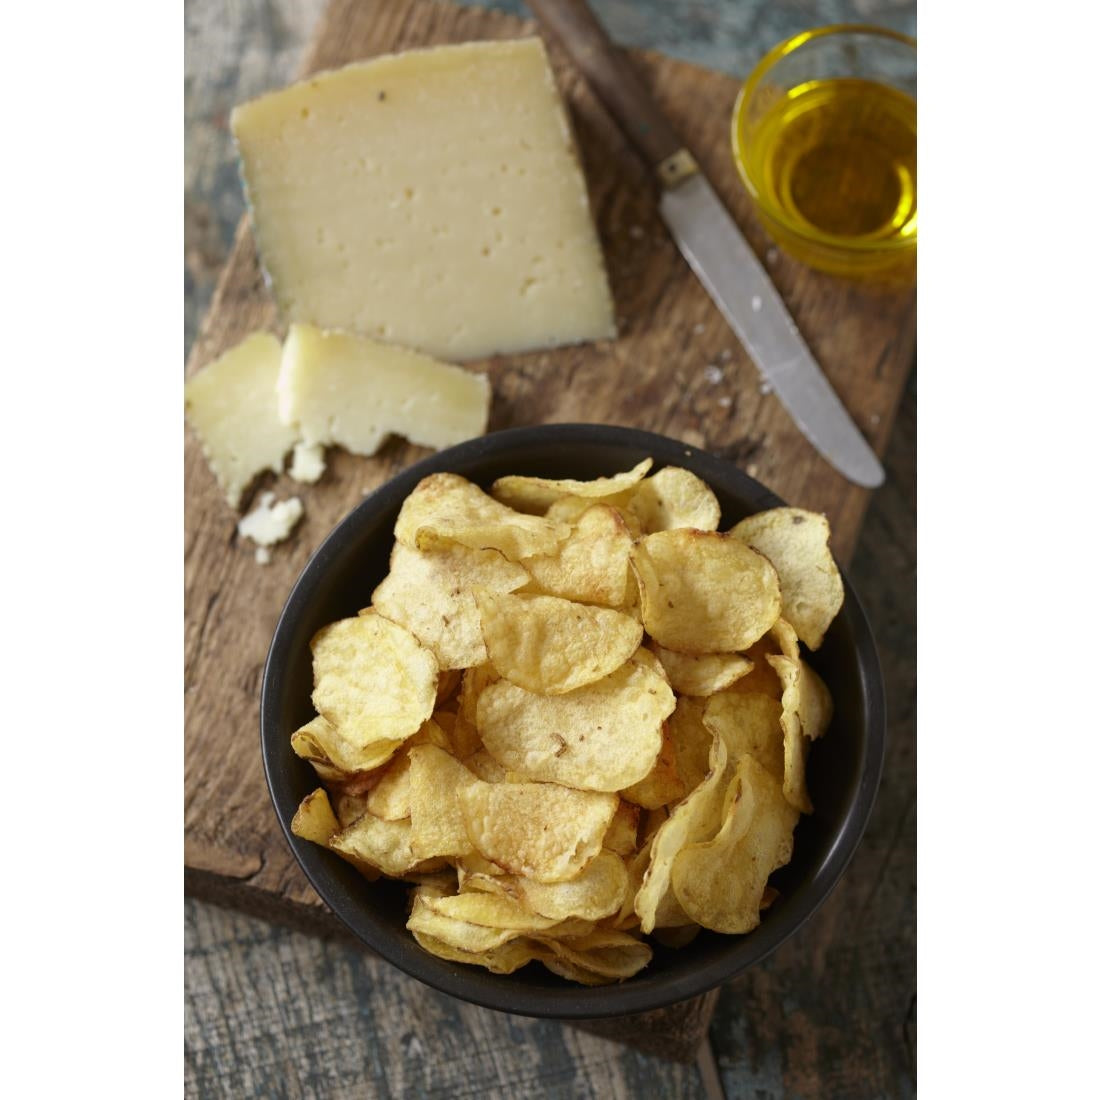 FU432 Brown Bag Crisps Cheddar and Onion 40g (Pack of 20)